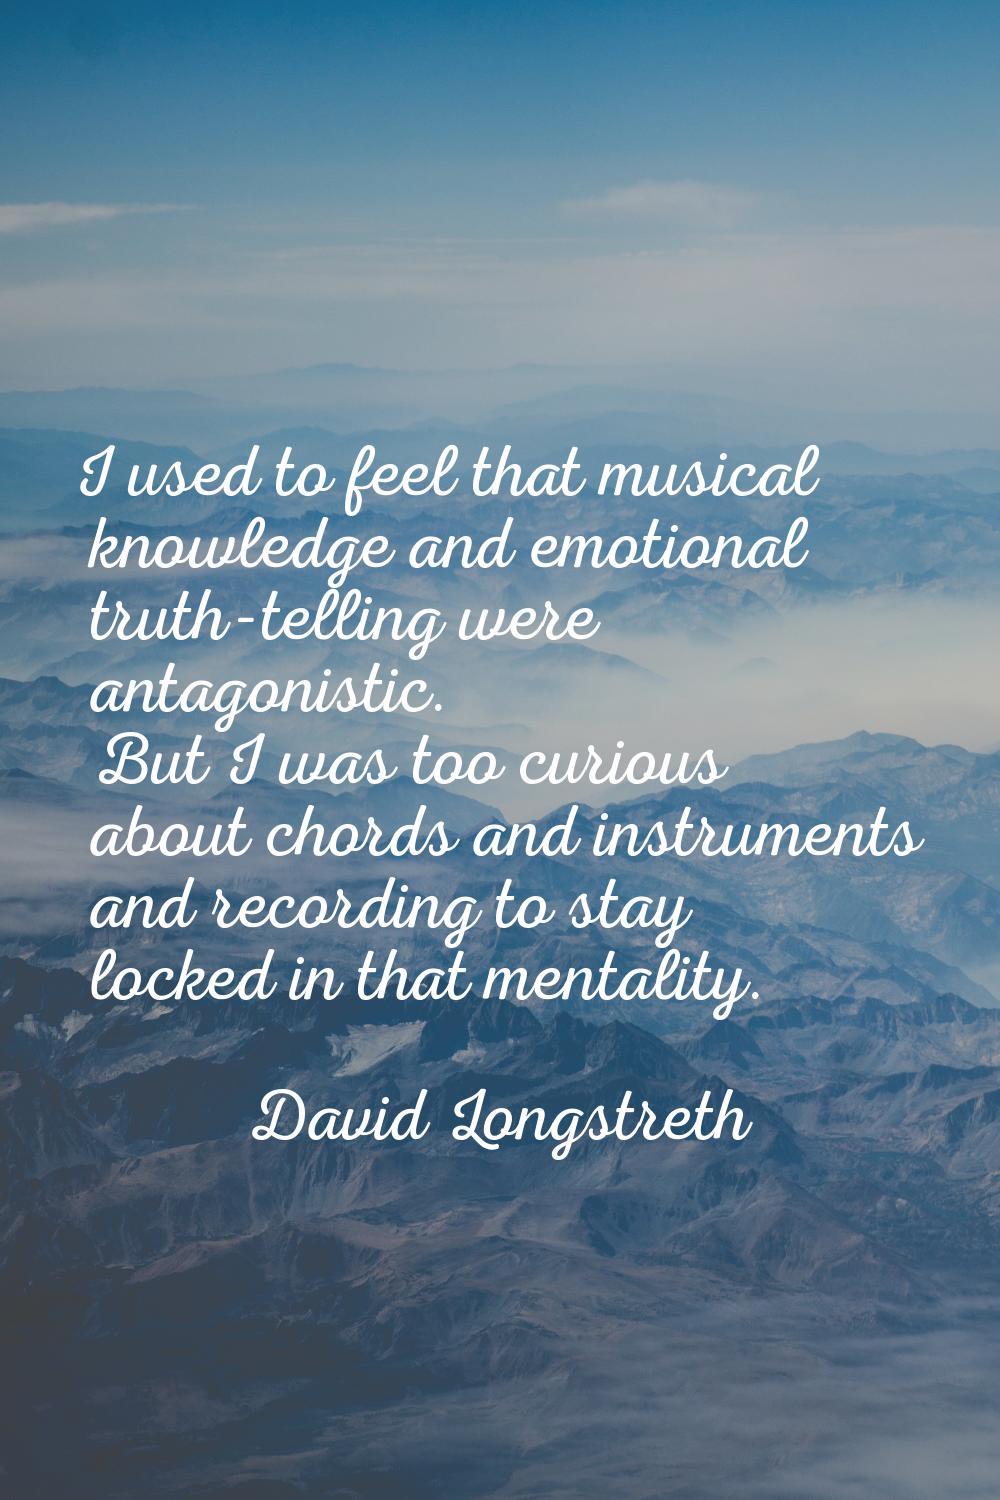 I used to feel that musical knowledge and emotional truth-telling were antagonistic. But I was too 